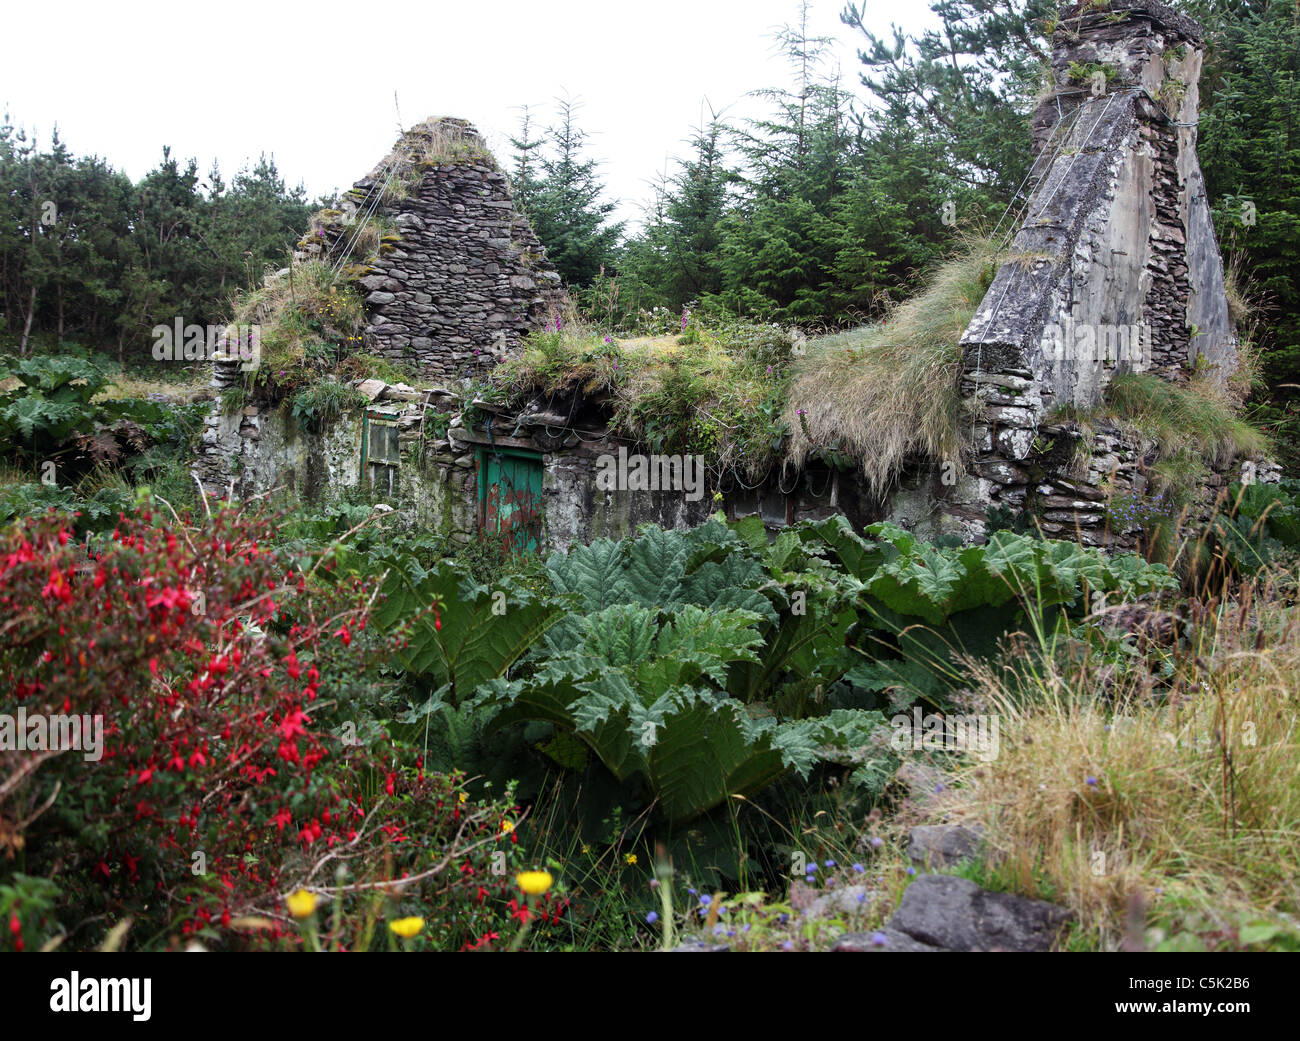 Ruined cottage Cill Rialaig Stock Photo